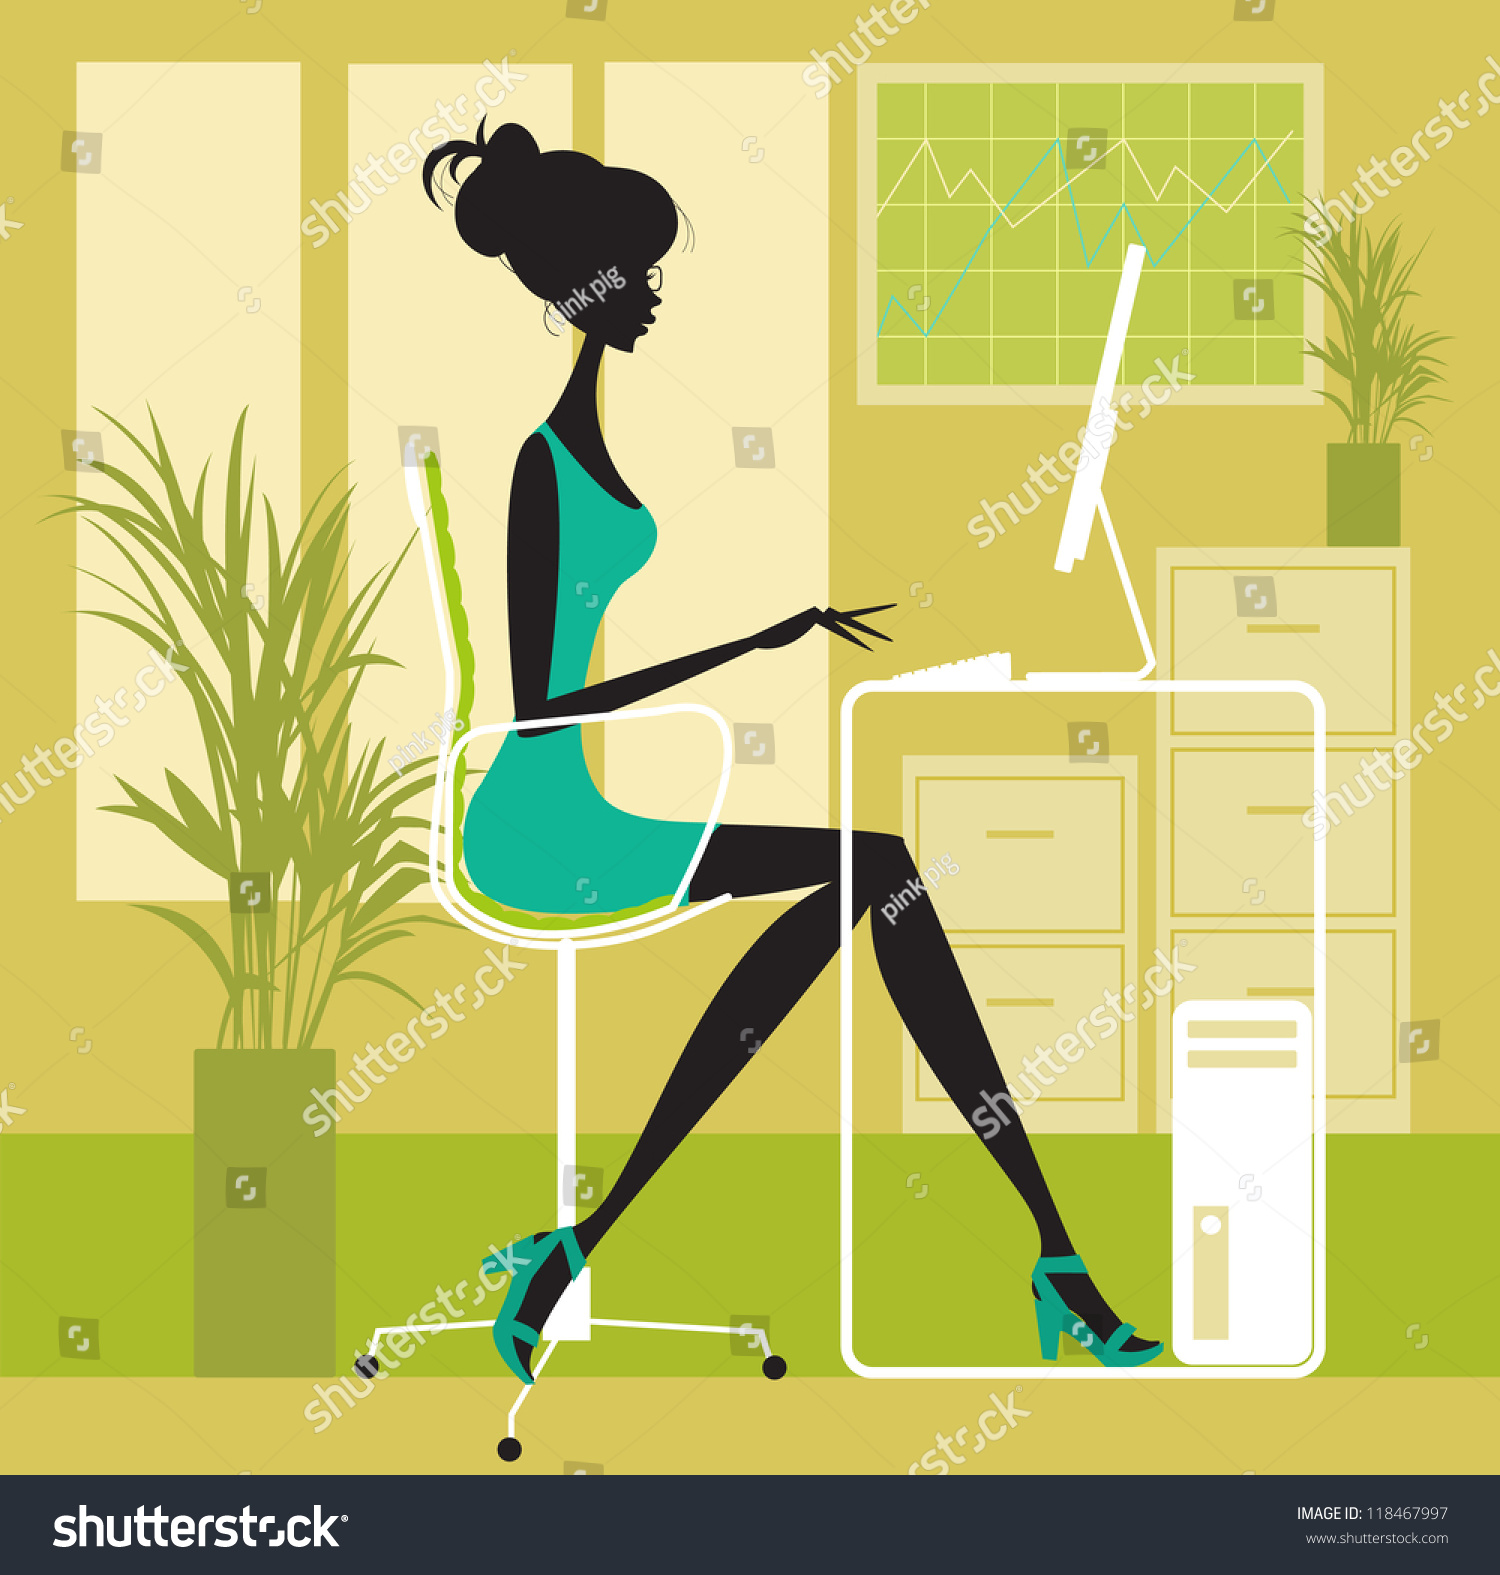 office environment clipart - photo #20